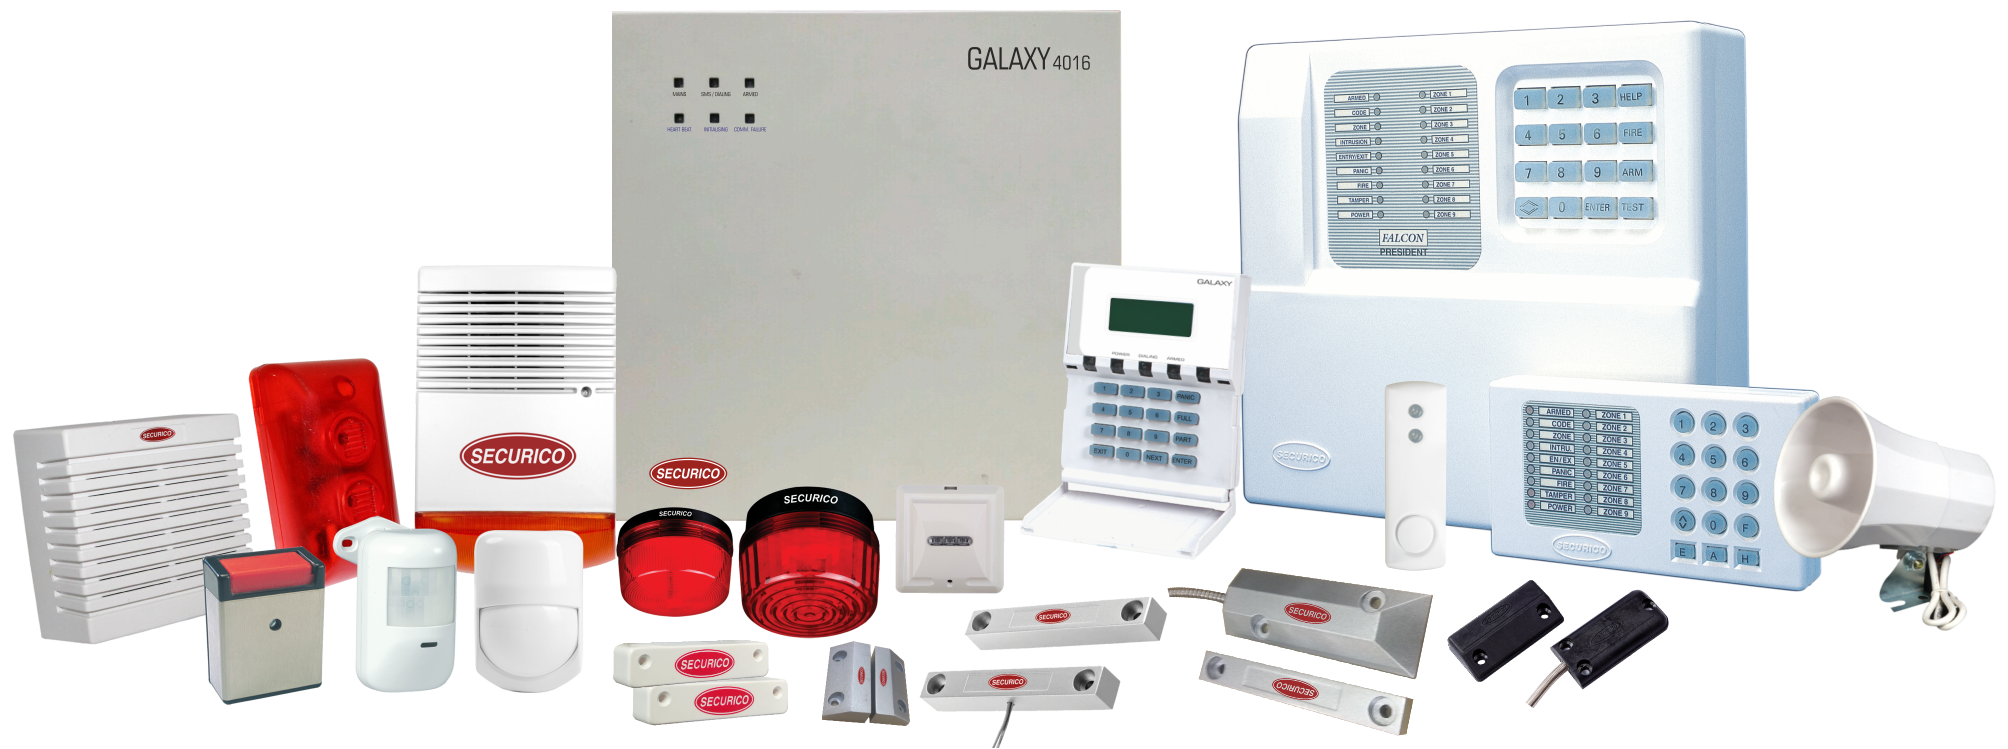 Wired Intruder Alarm Systems Securico